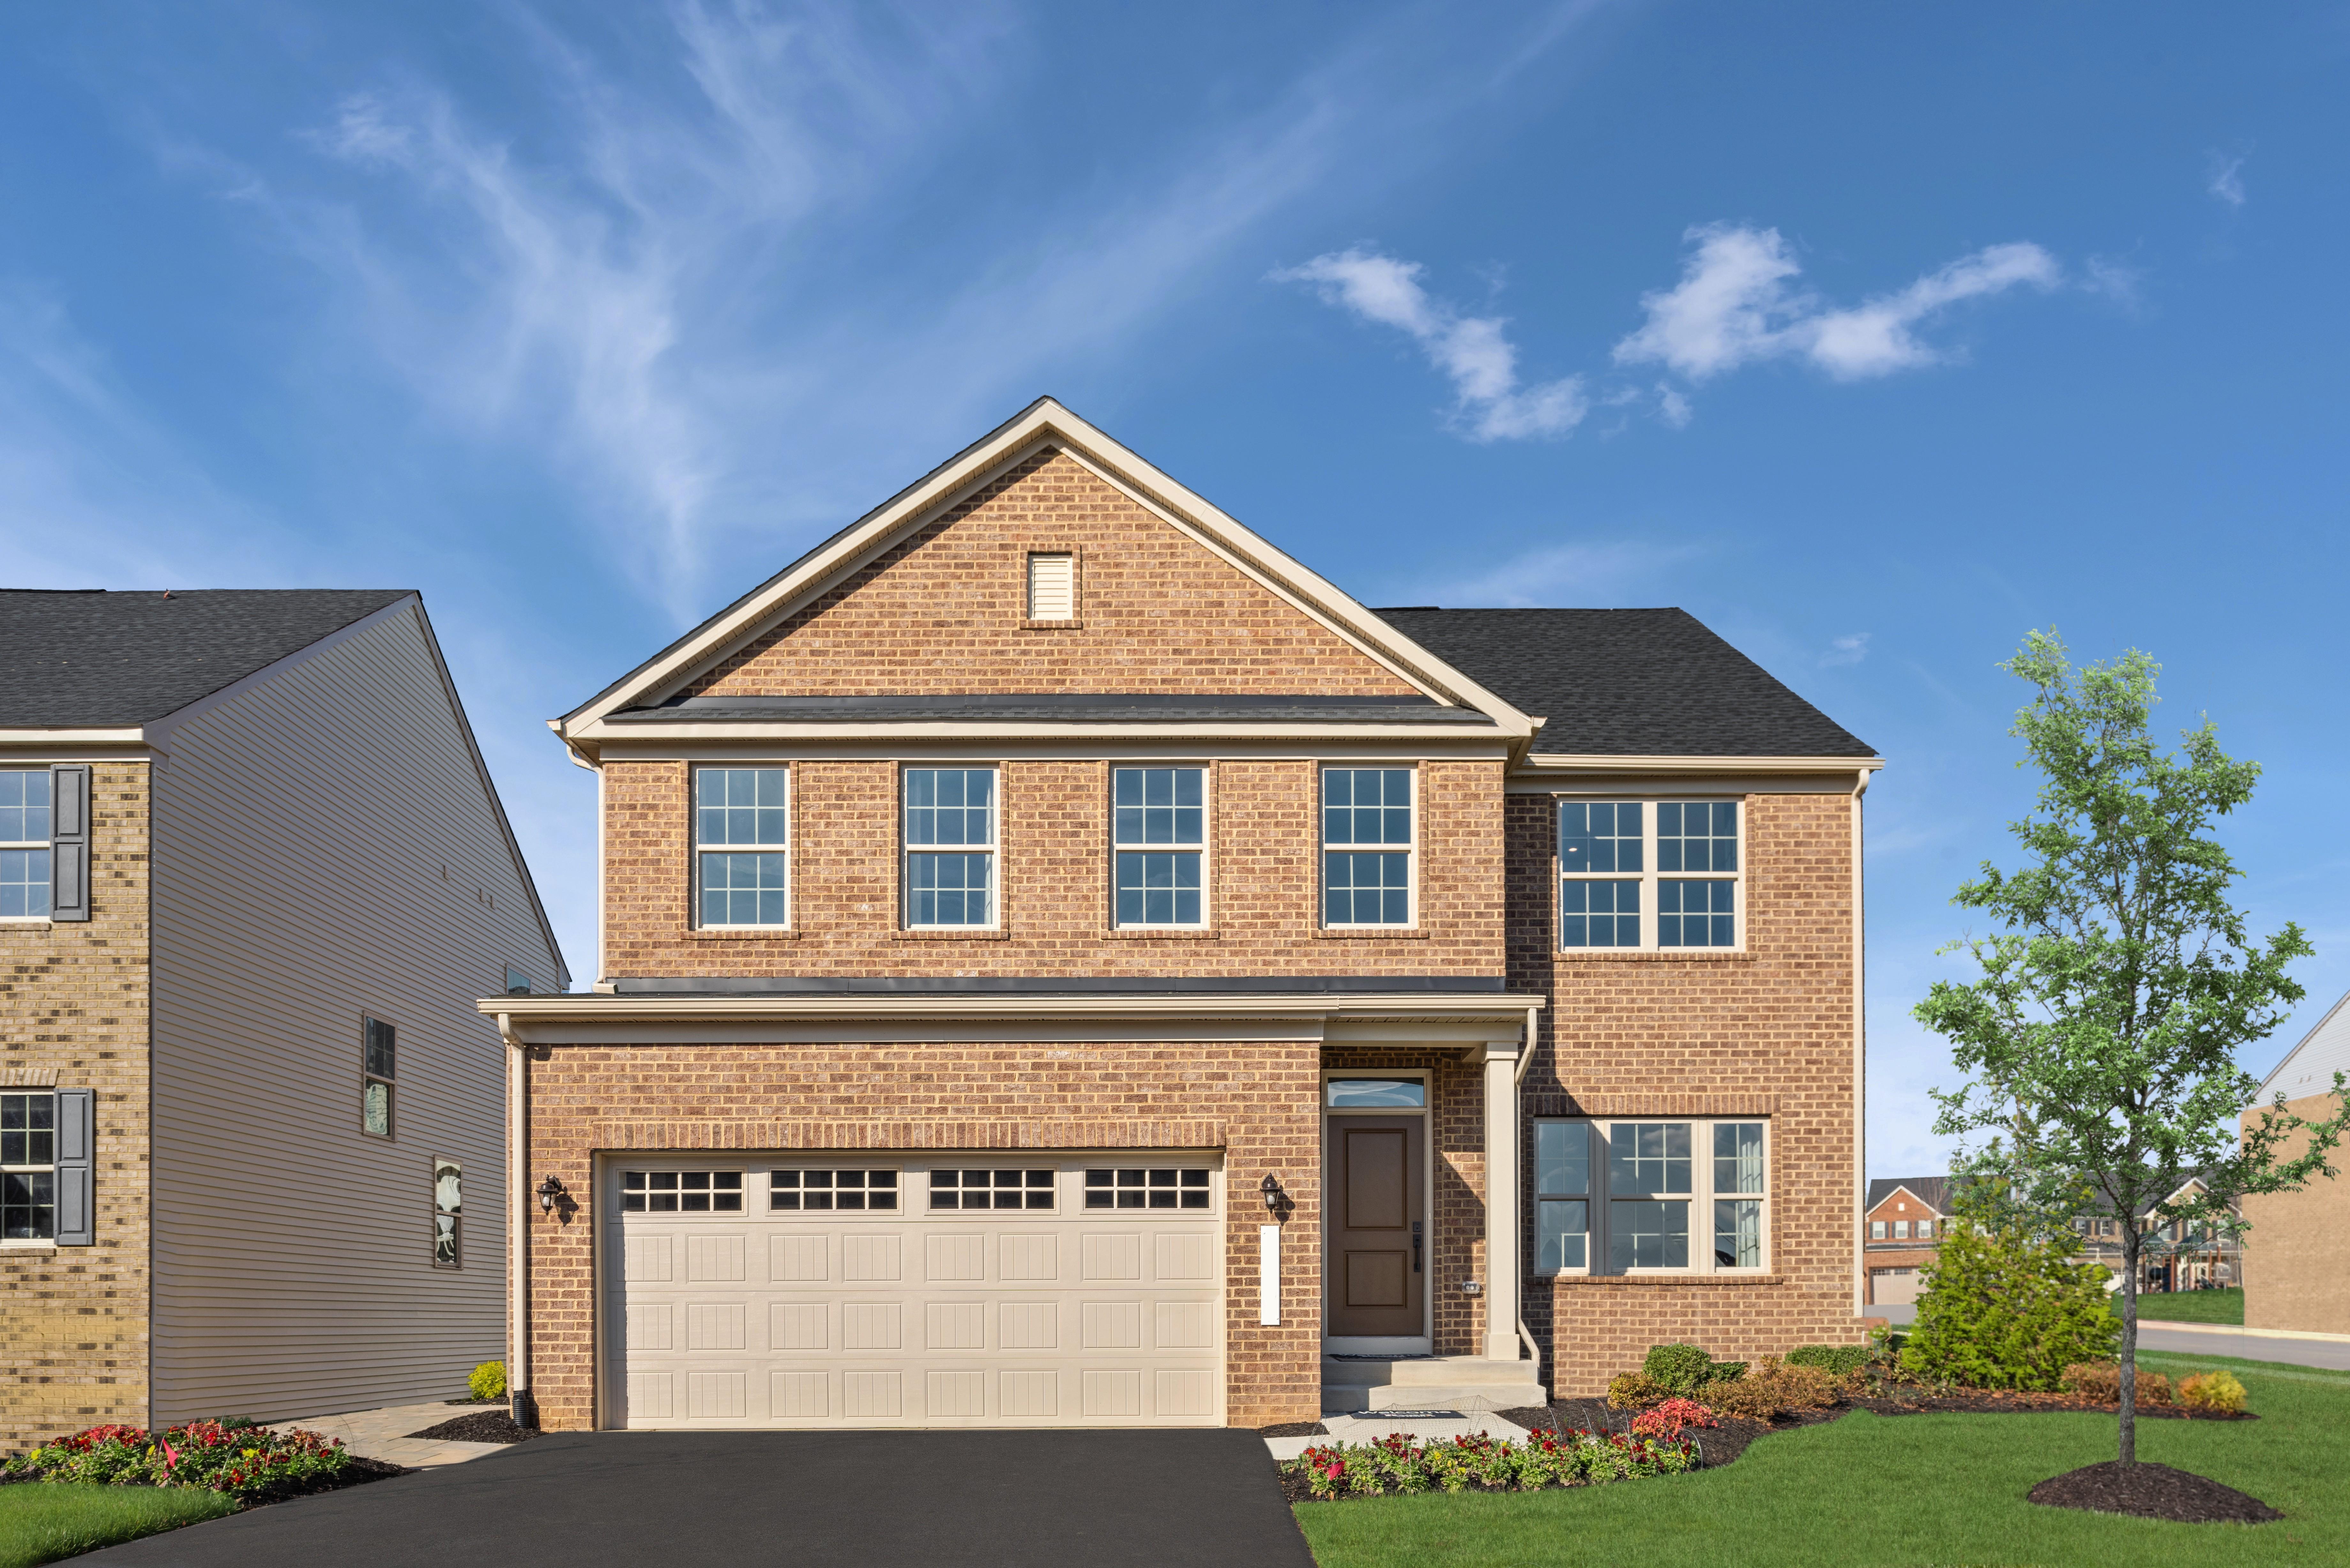 Property Image for 14801 Townshend Terrace Ave Plan: Columbia